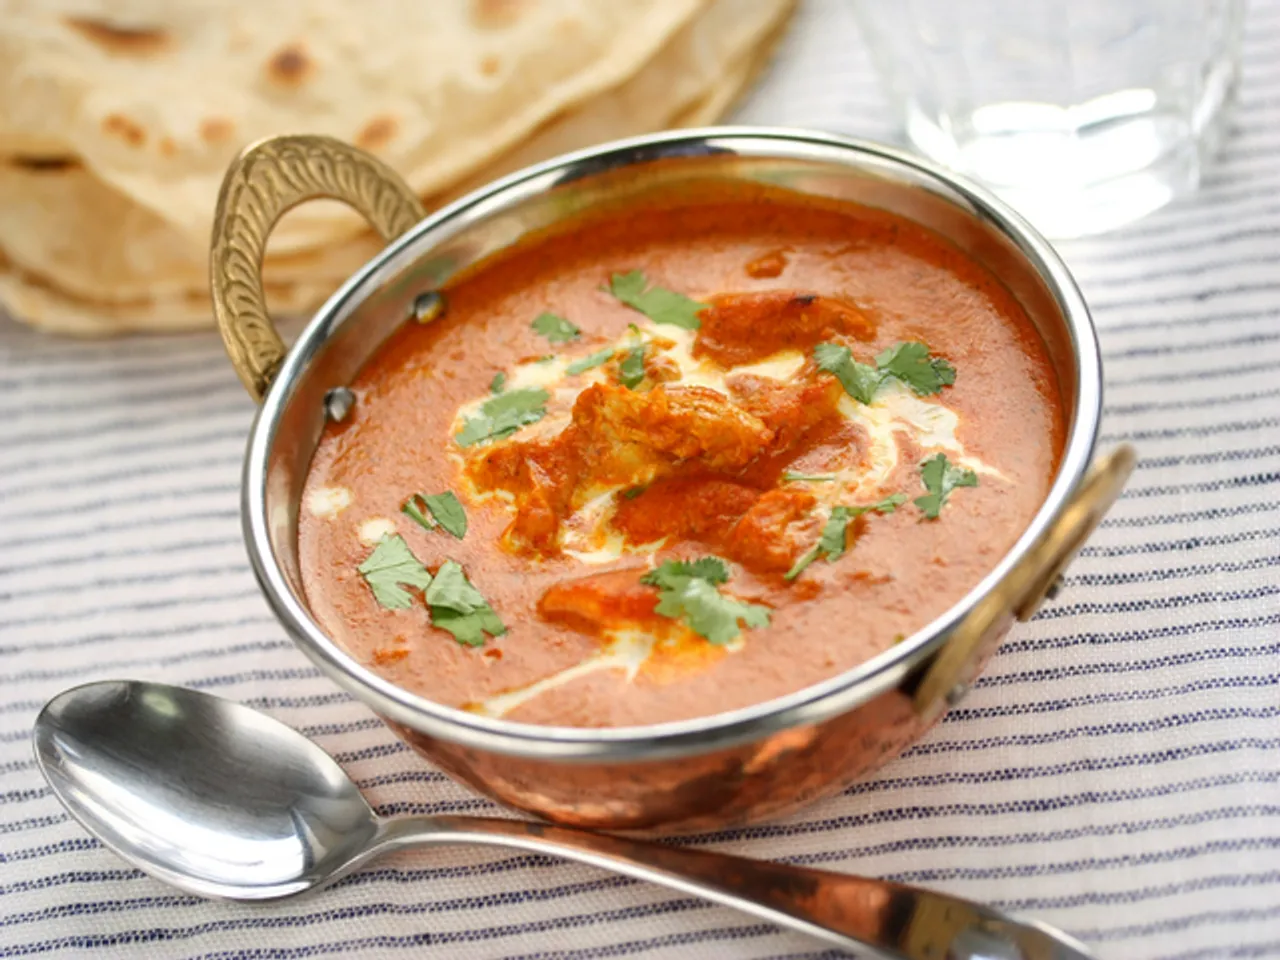 Butter Chicken and its Humble Origin Story